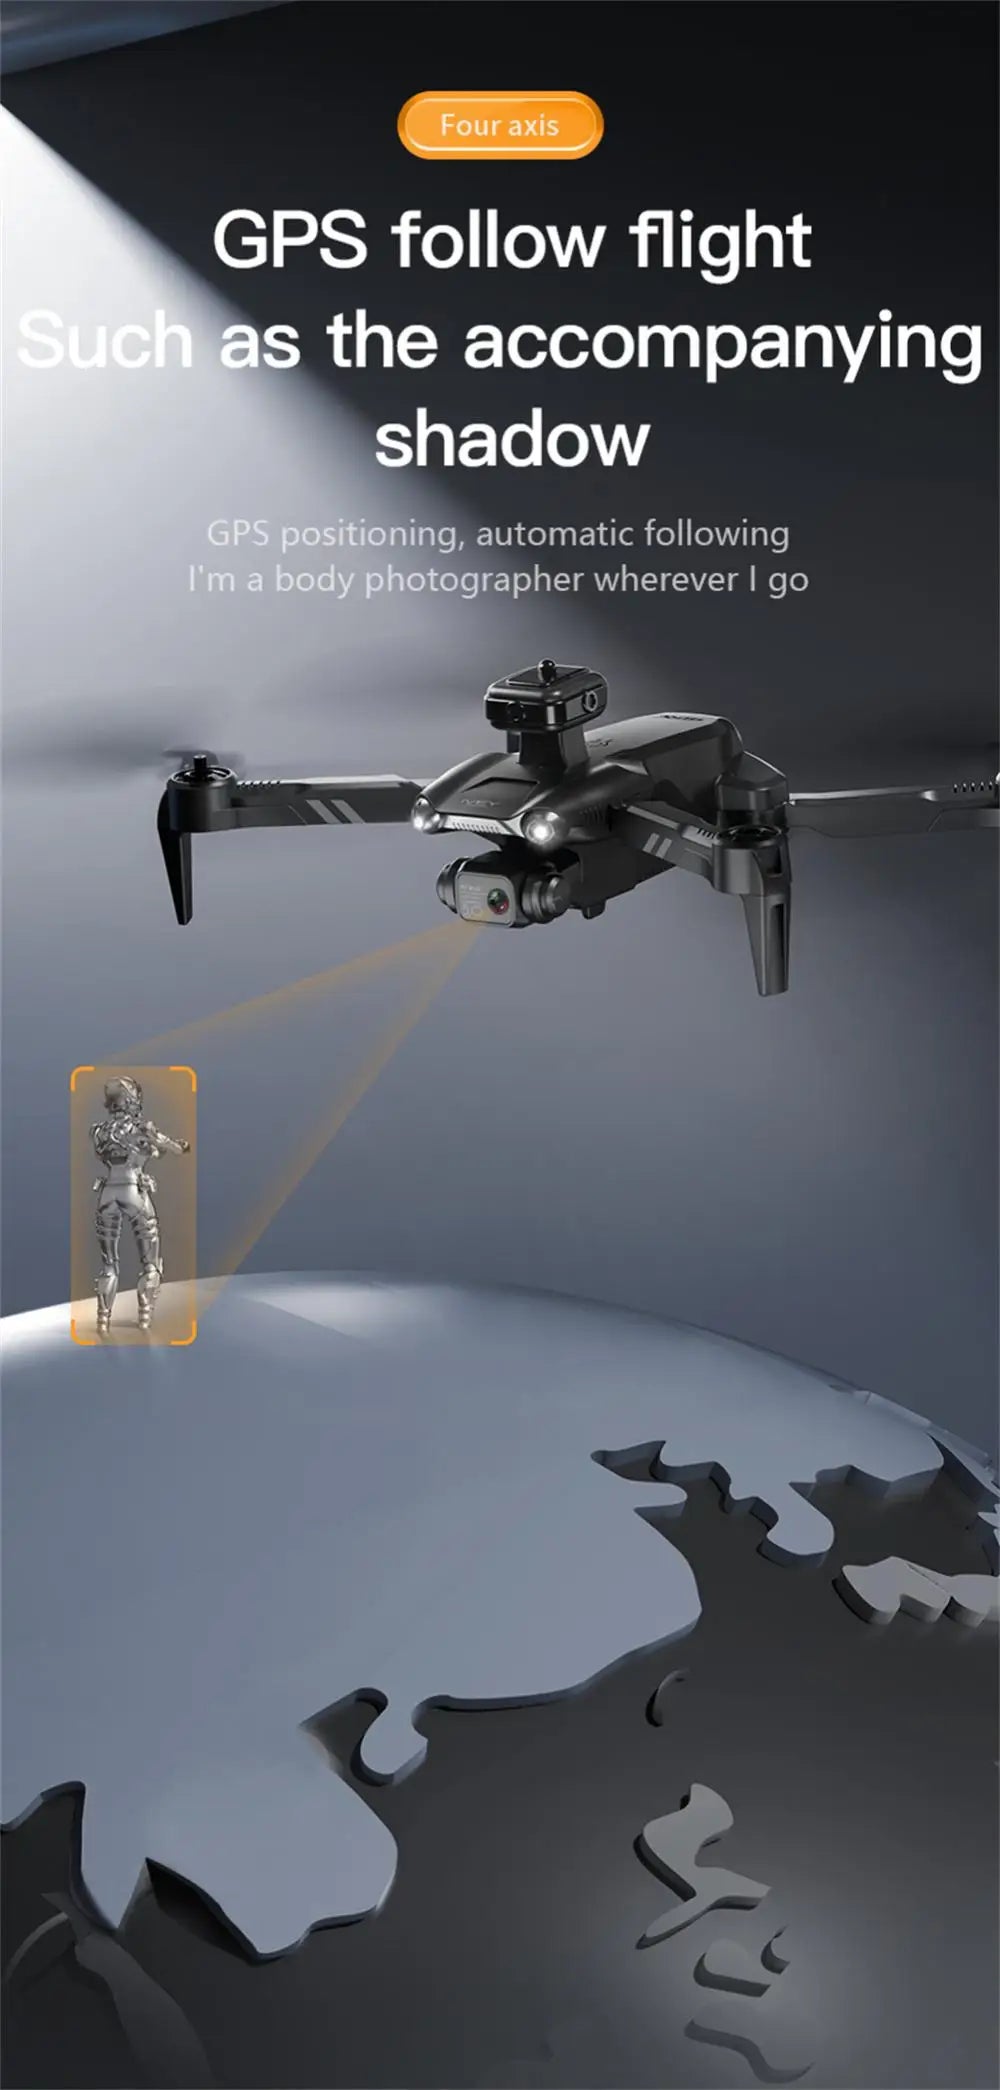 V28 Drone, axis gps follow flight such as the accompanying